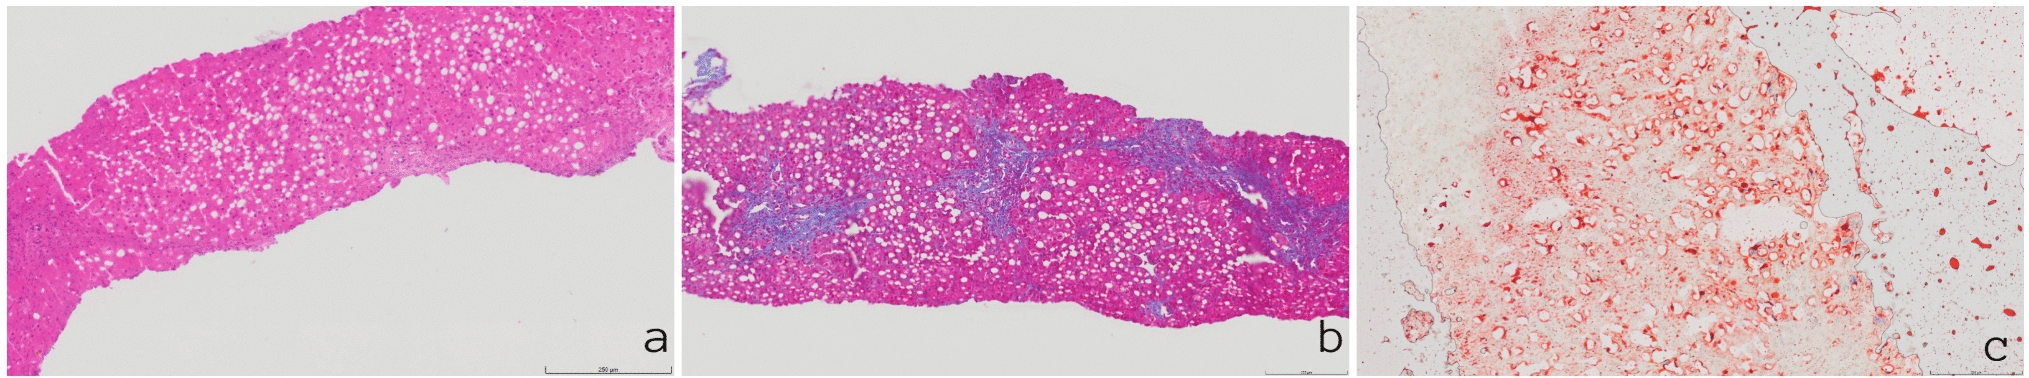 Membranoproliferative glomerulonephritis in a patient with lysinuric protein intolerance: lesson for the clinical nephrologist